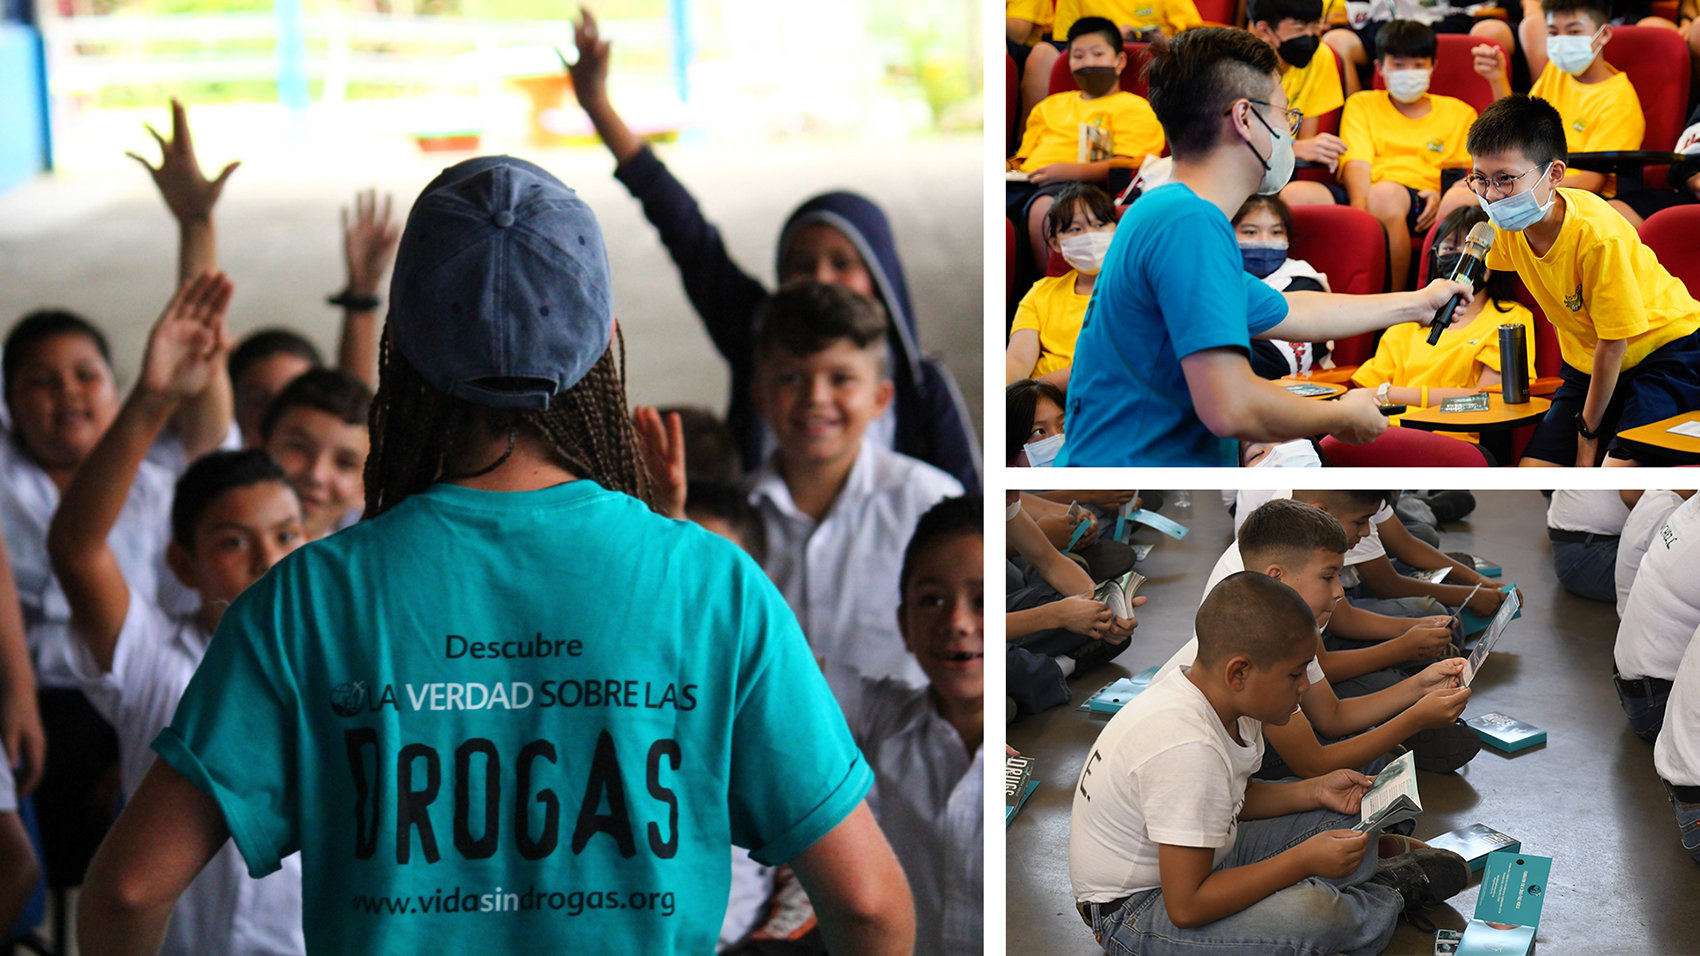 Thousands of volunteers around the world know that education is the answer to drug abuse.